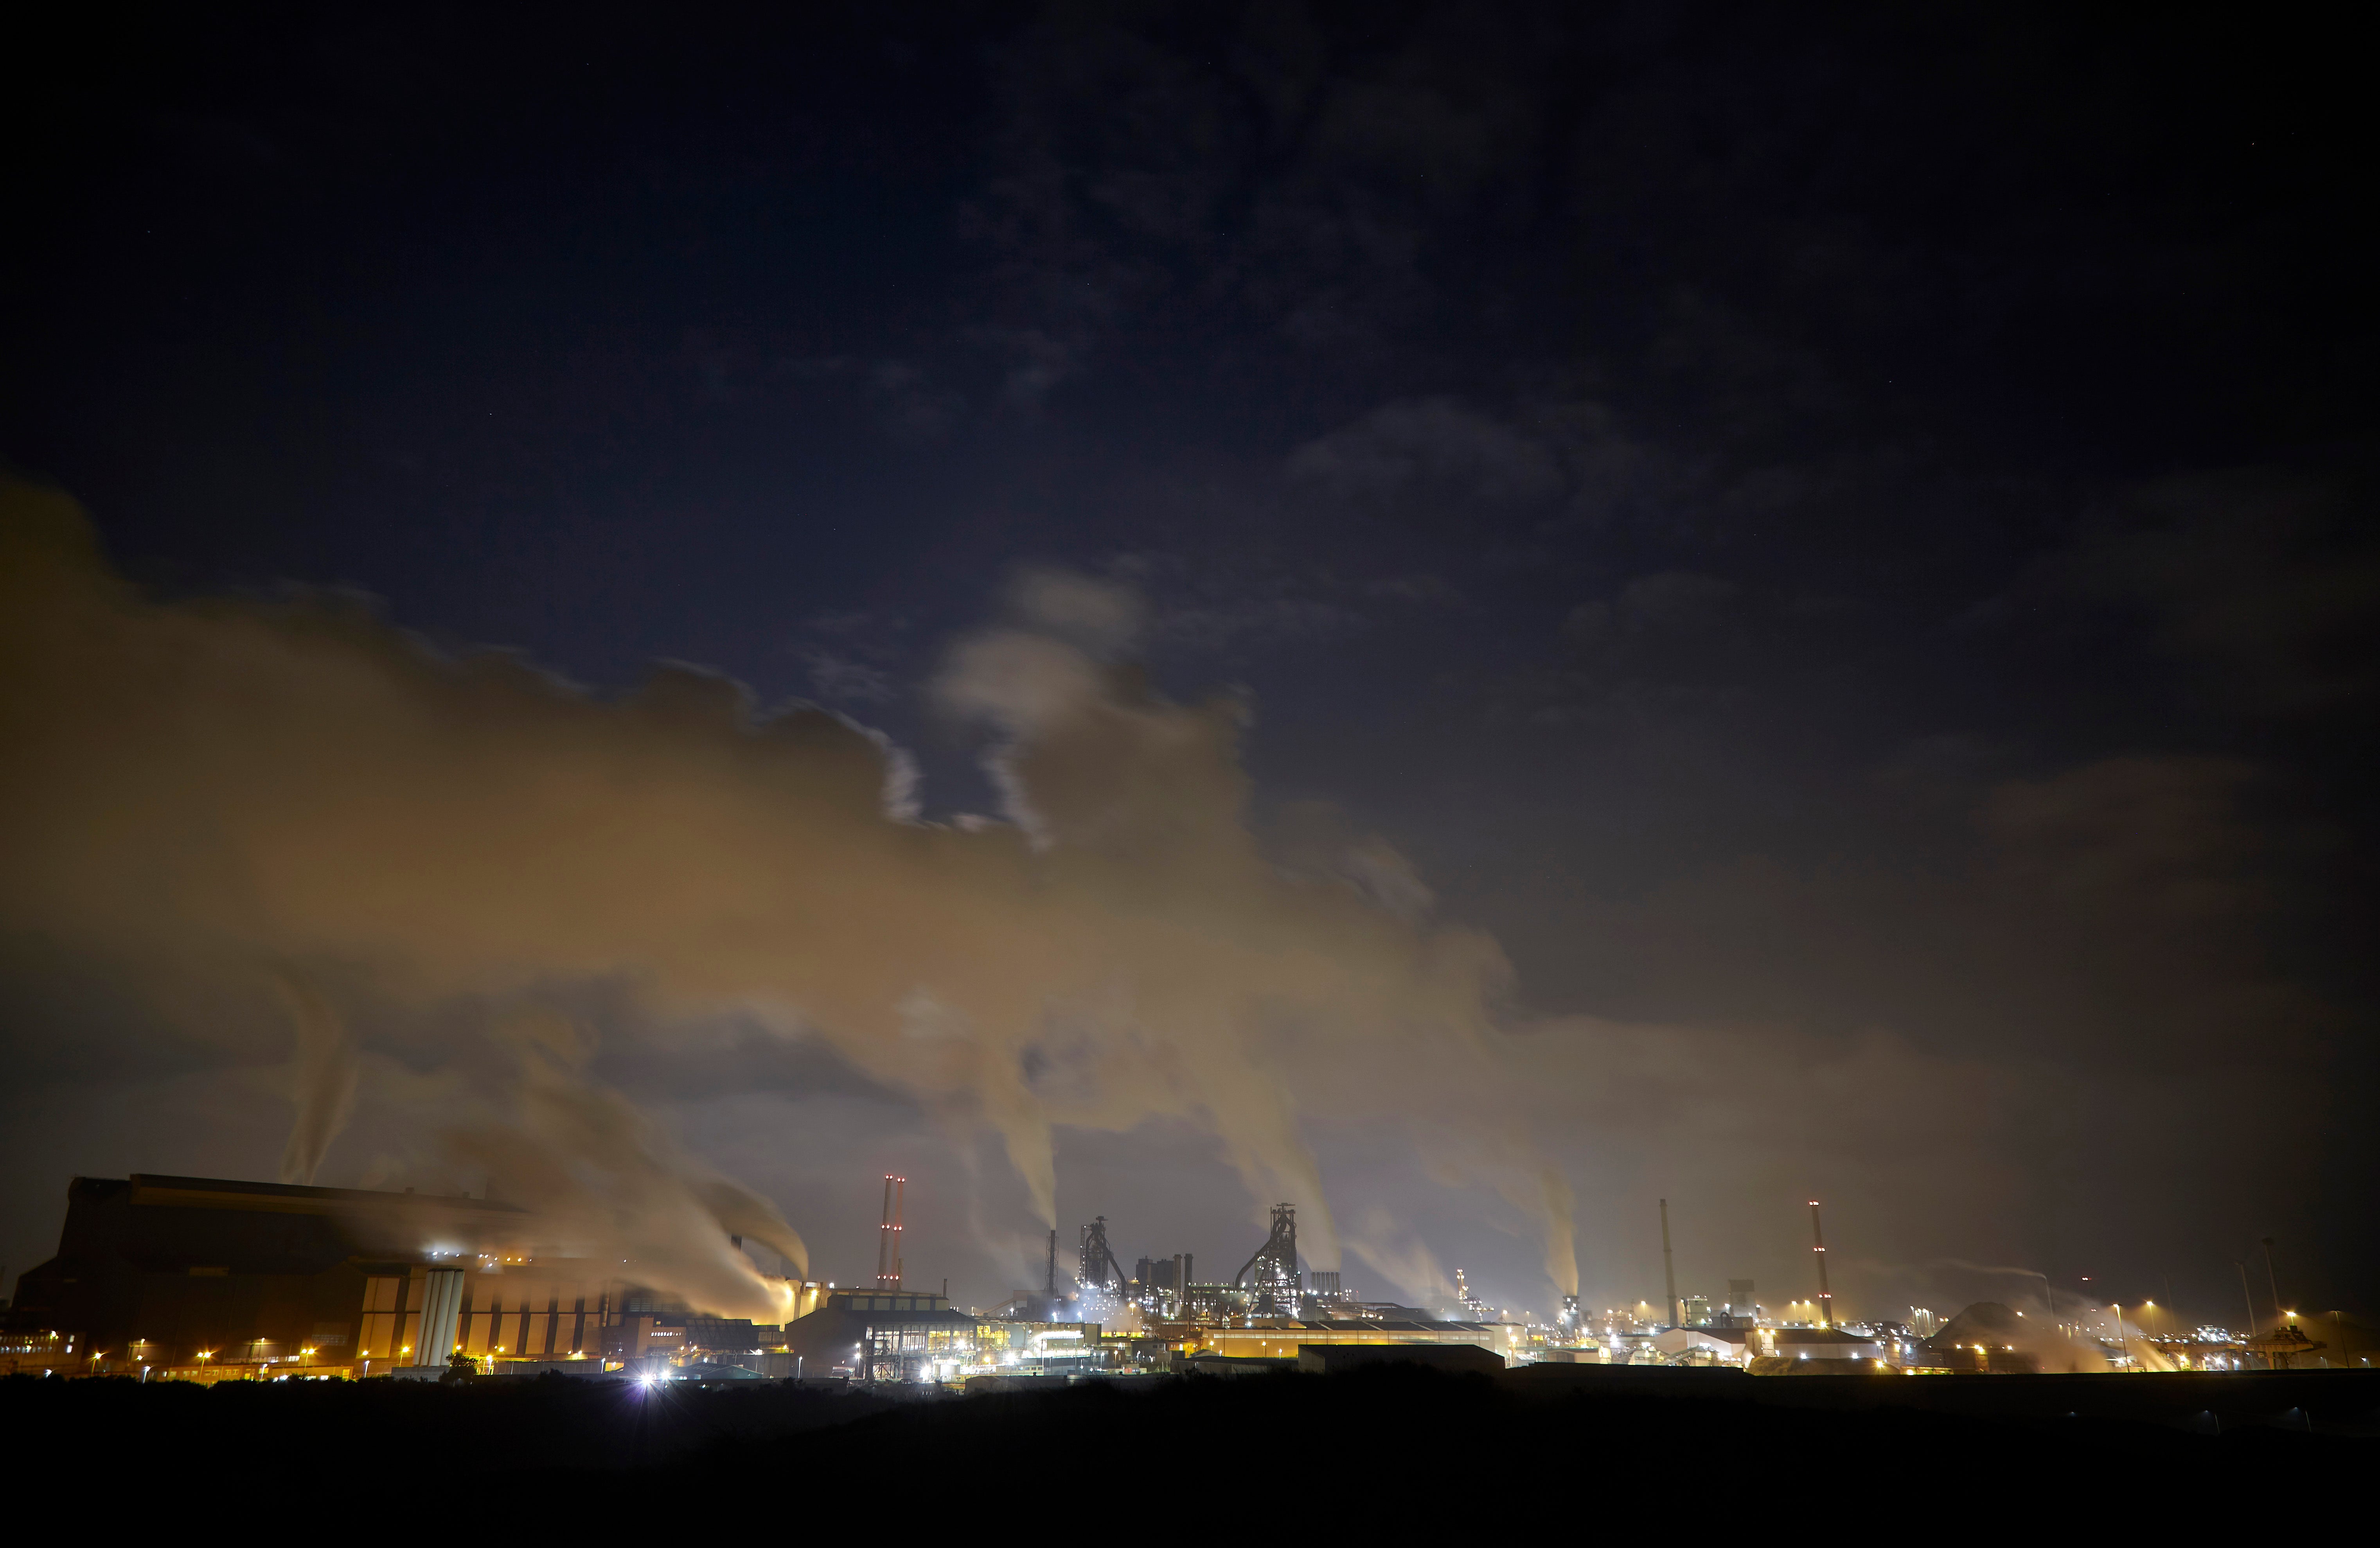 Fumes from the Tata Steel plant are seen on 20 August 2021 in Wijk aan Zee, Netherlands